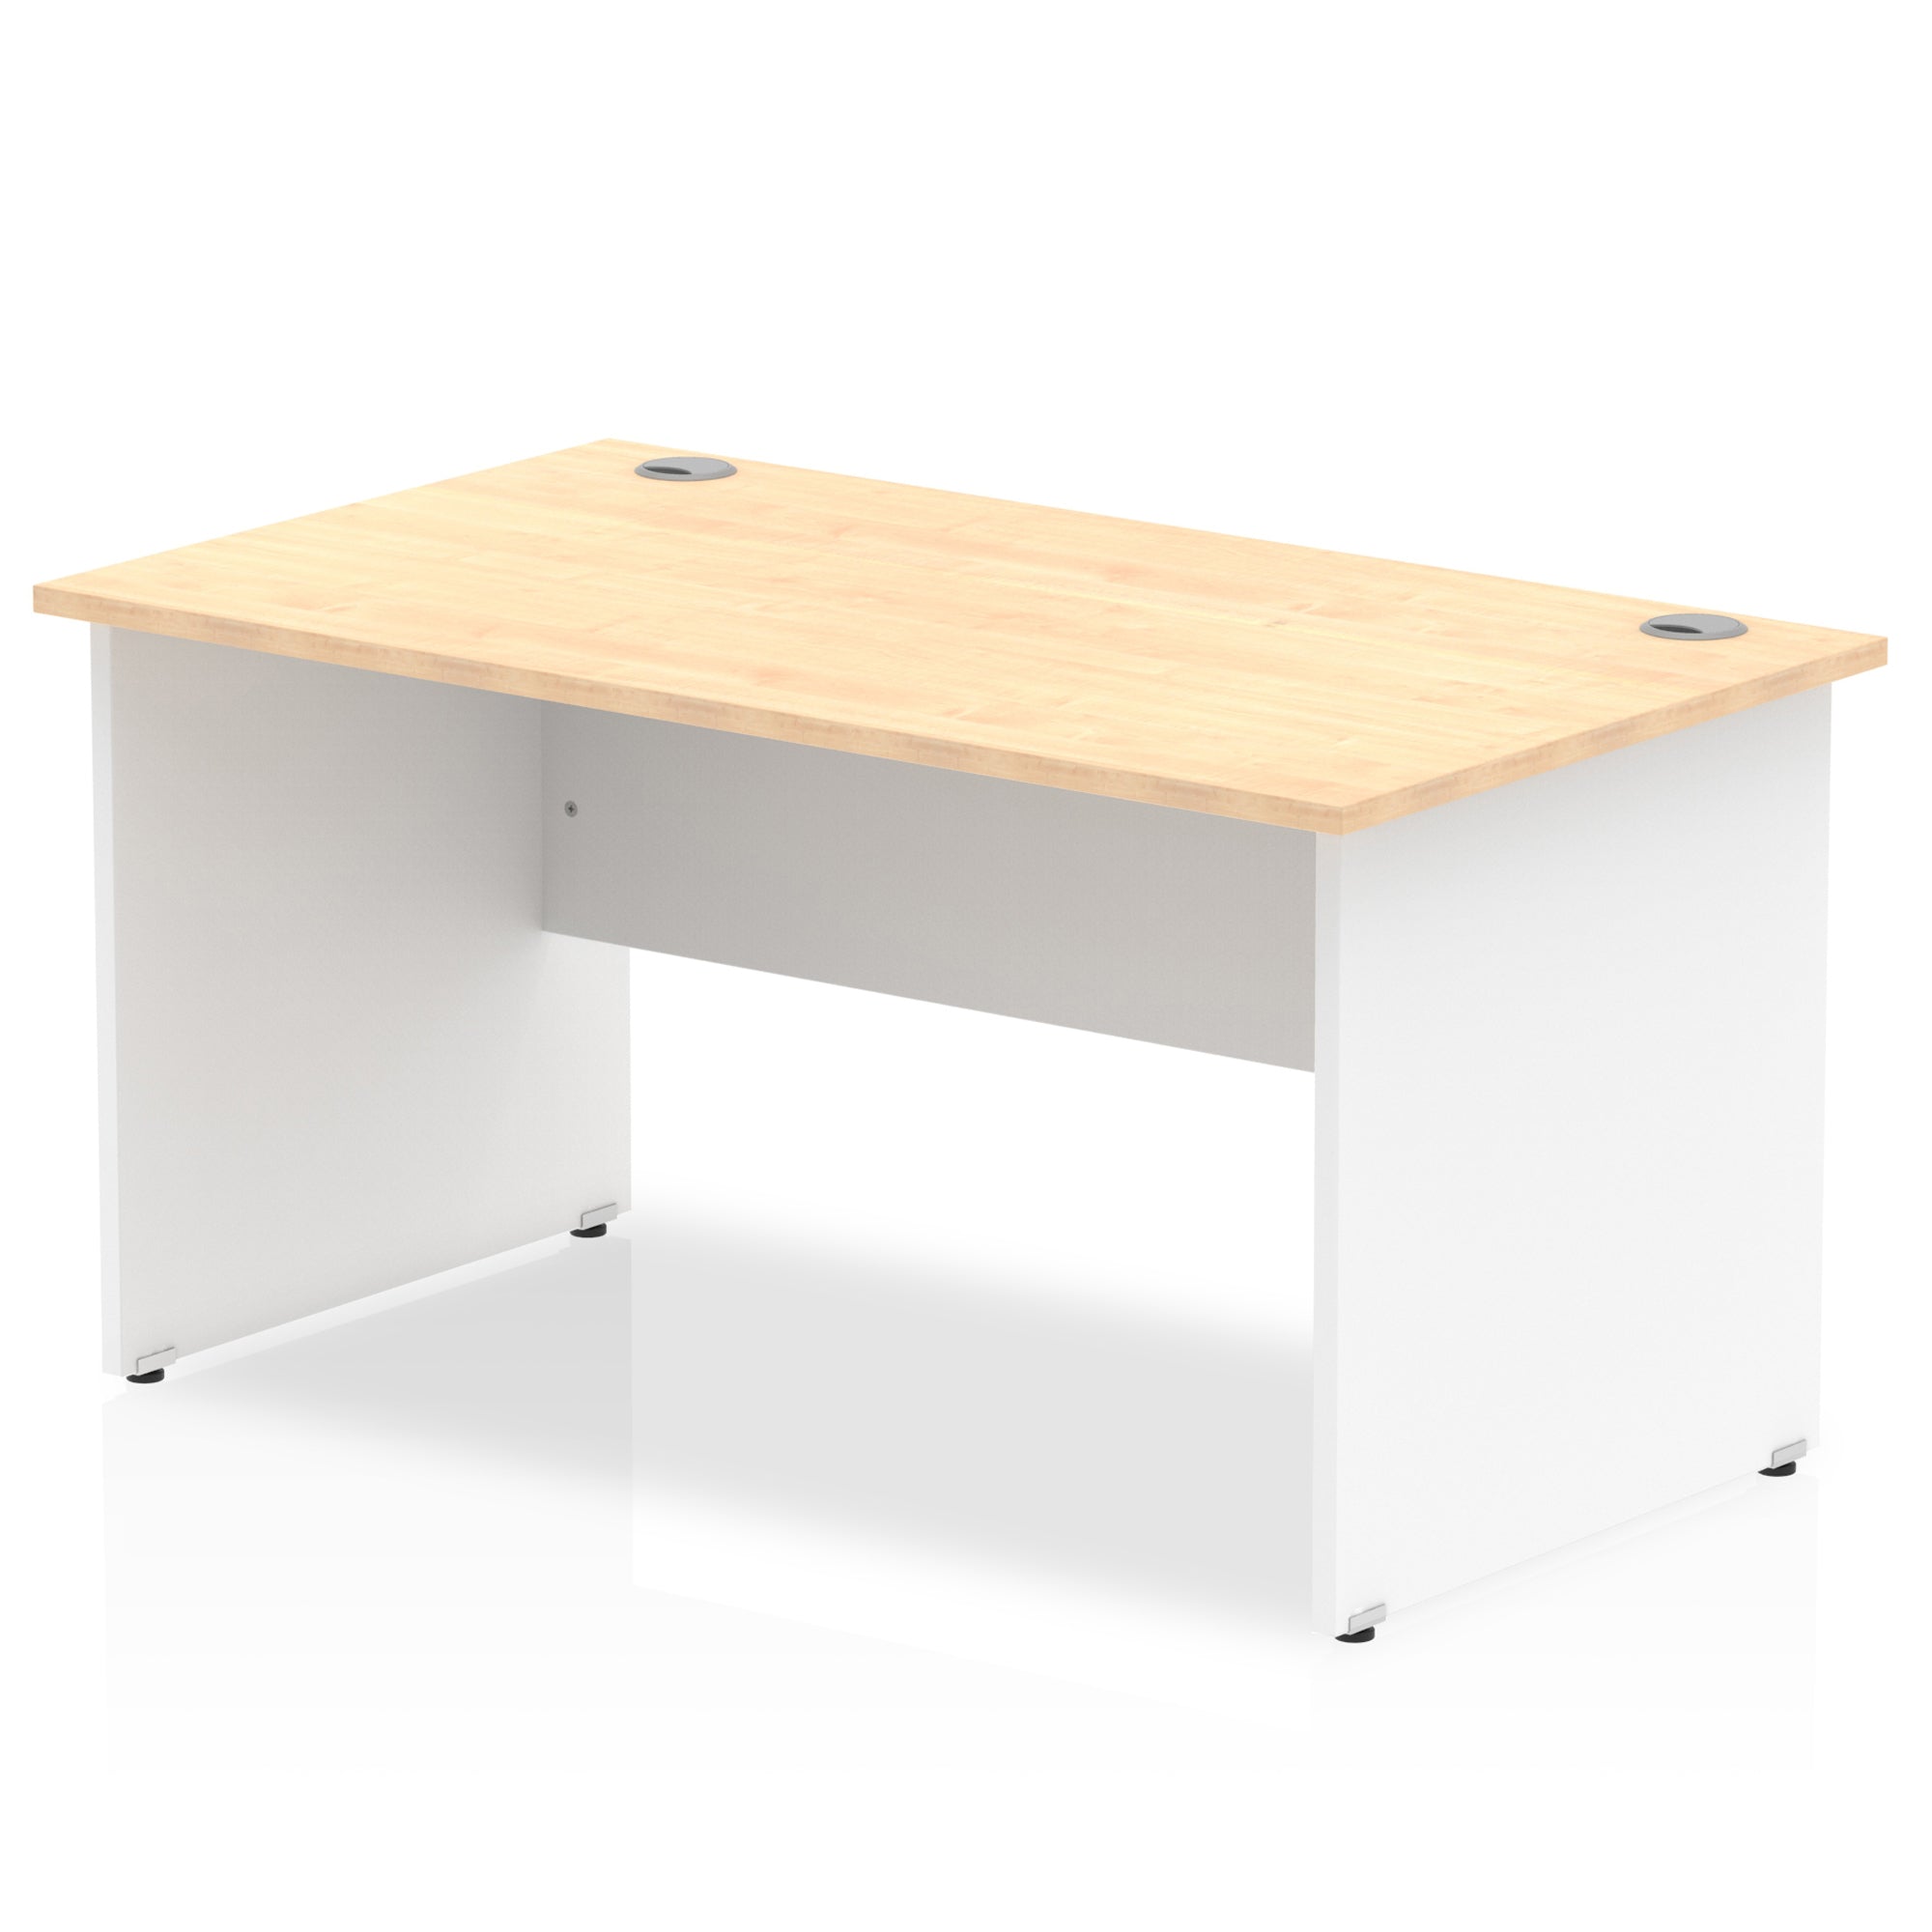 Impulse 1400mm Straight Desk Panel End Leg - Rectangular MFC Table, 1400x800 Top, Self-Assembly, 5-Year Guarantee, White & Matching Frame